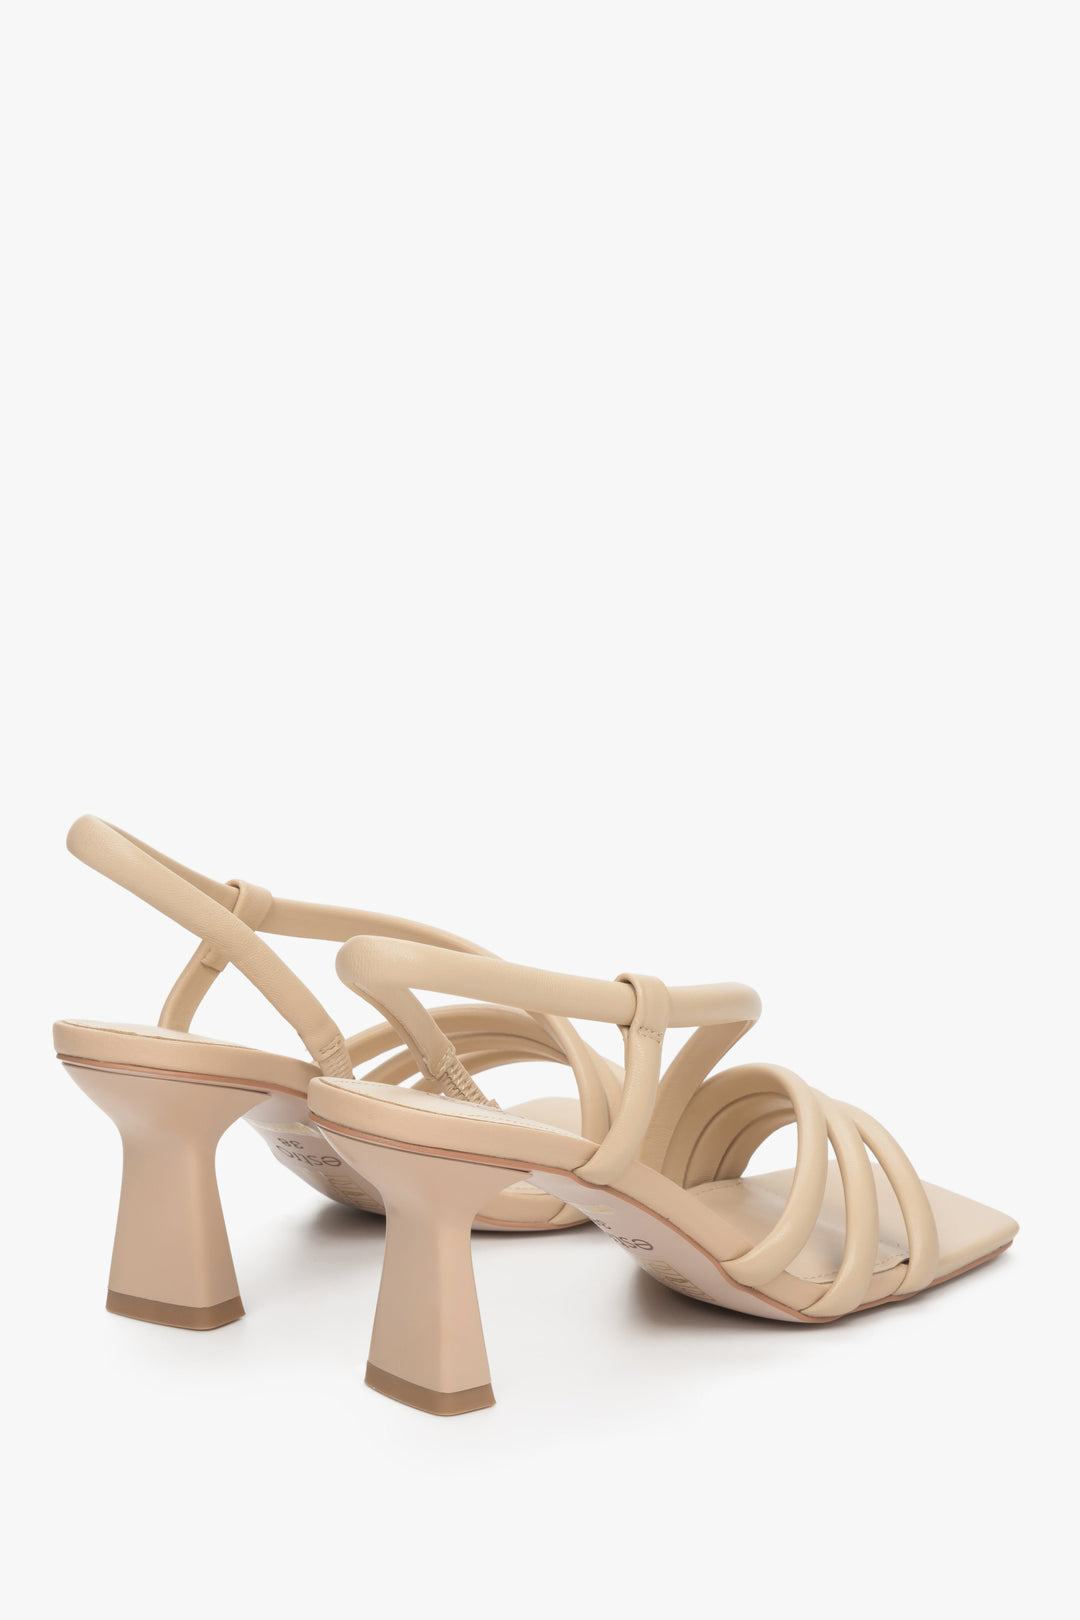 Women's beige strappy sandals made of natural leather - a close-up on heel and shoe sideline.